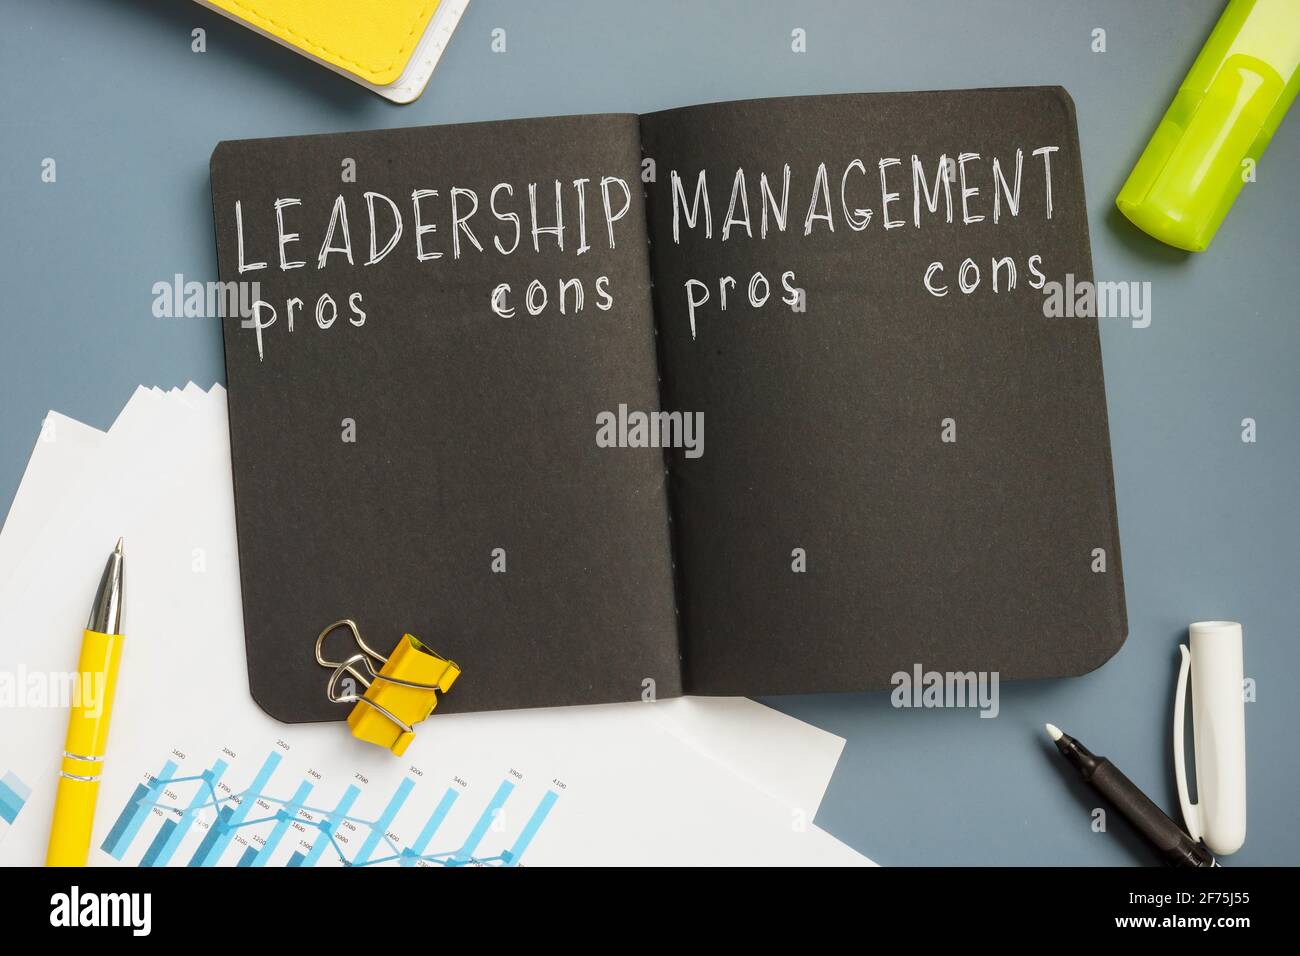 Leadership or management pros and cons comparison. Stock Photo